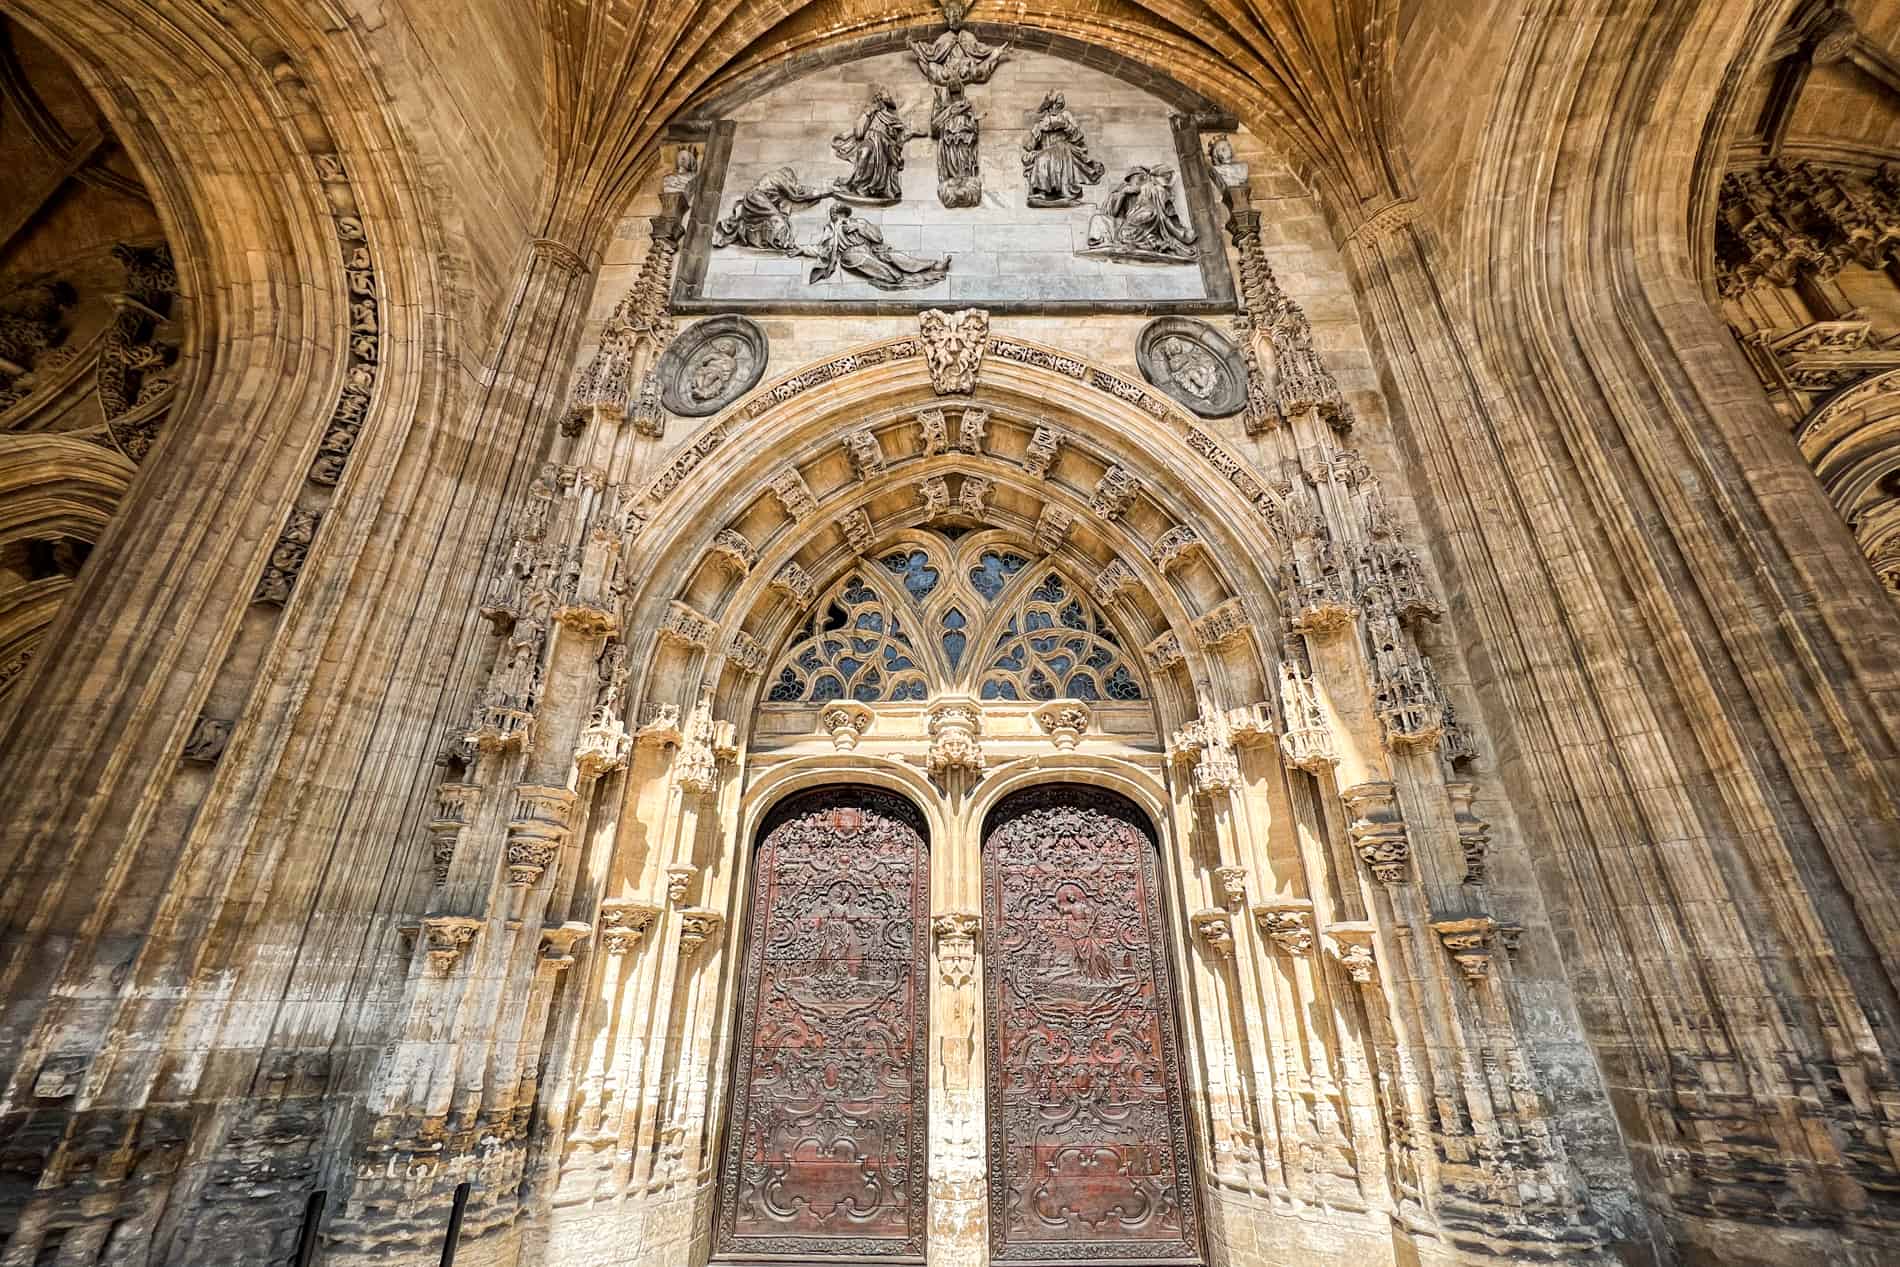 The intricate carvings and decor of the vaulted archway entrance of the Gothic Basilica del Salvador in Oviedo.